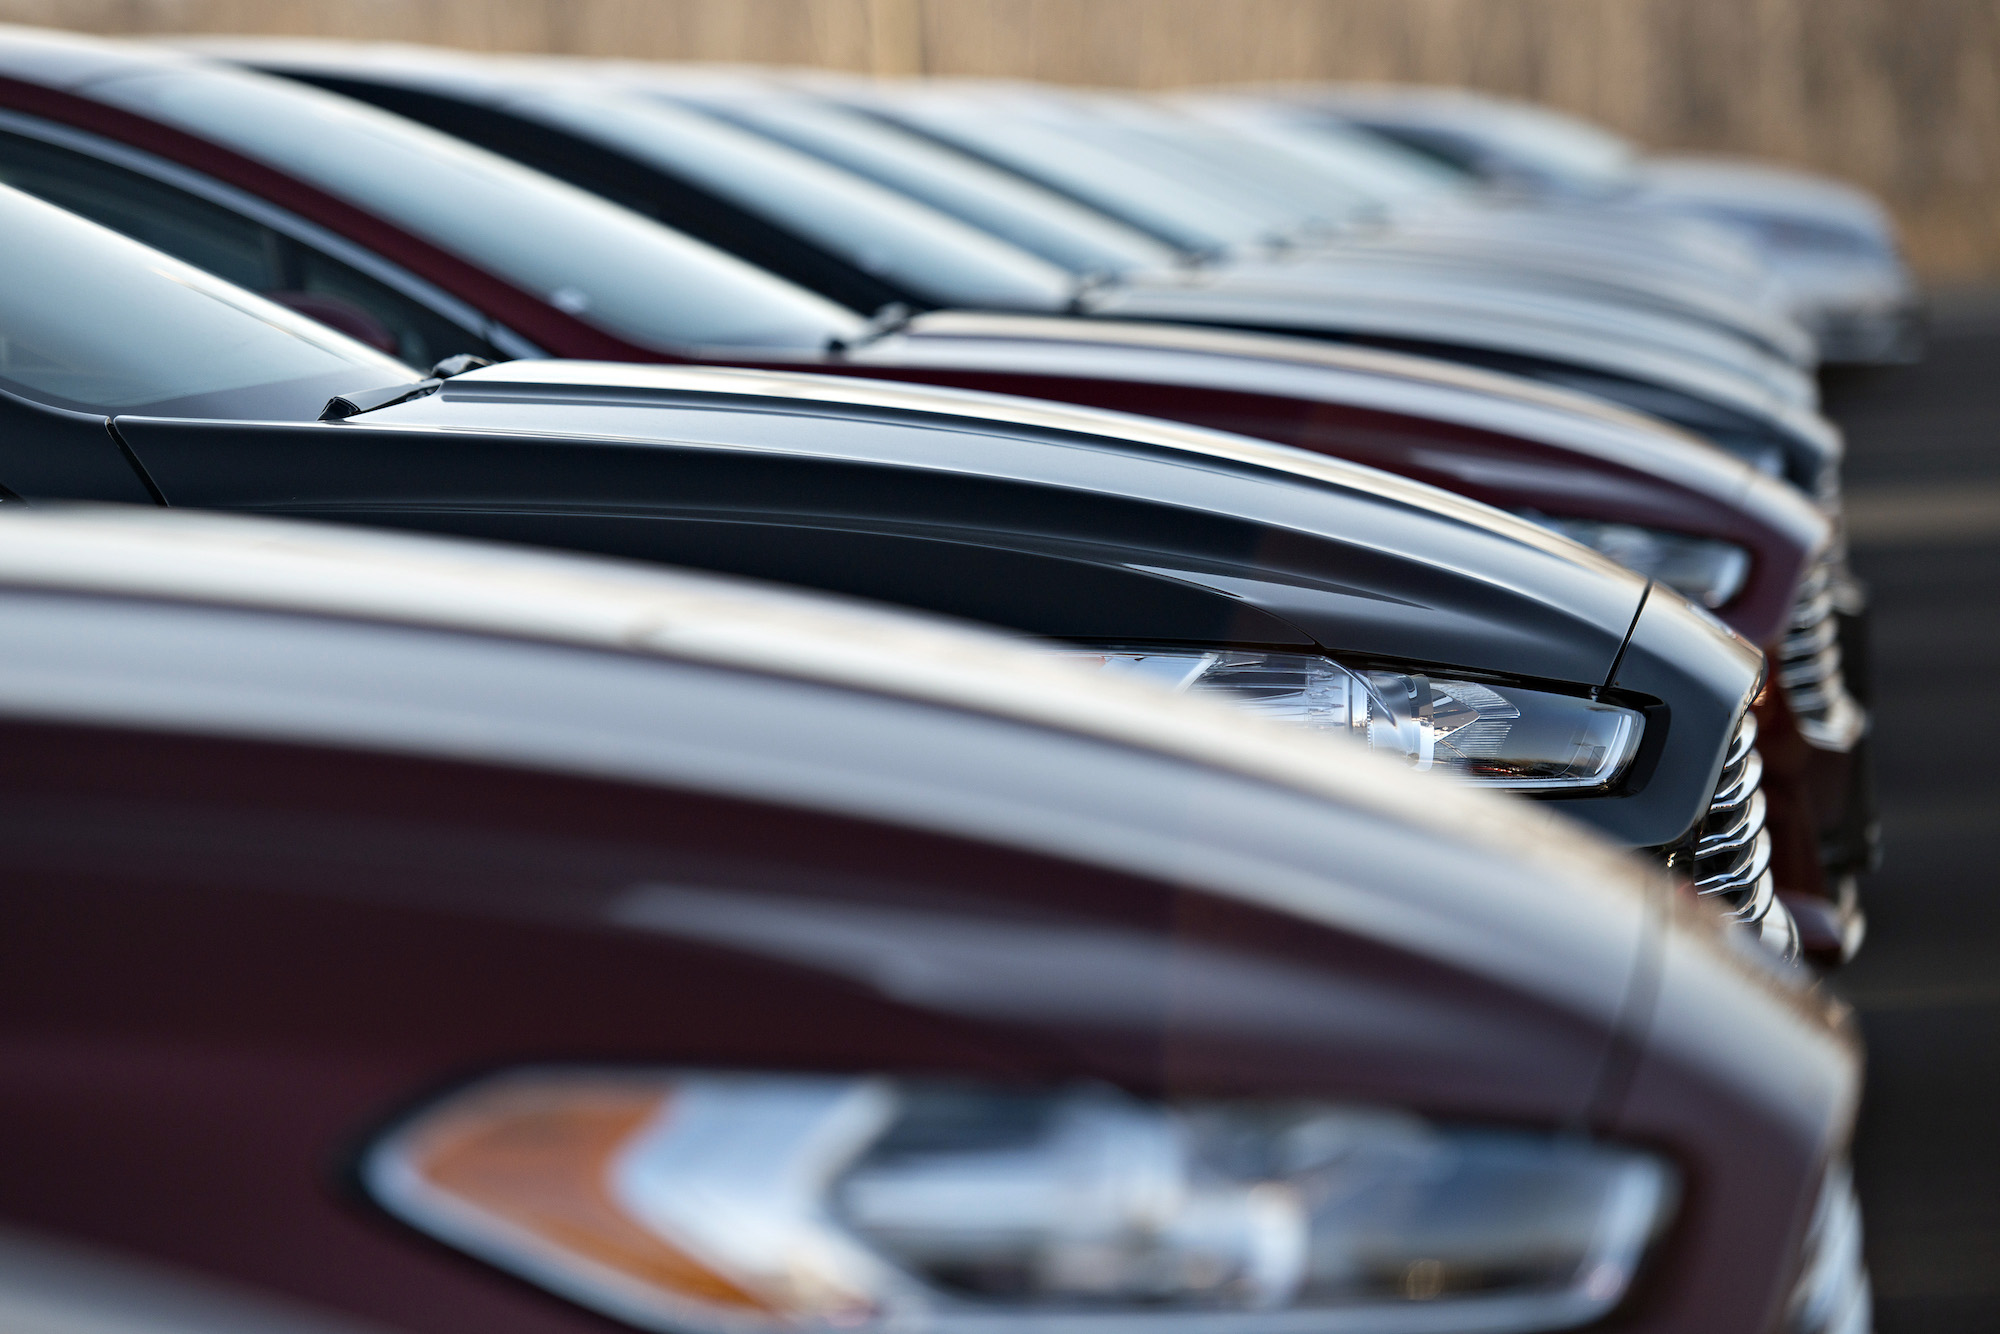 A row of 2014 Ford Fusion vehicles sit on a car sales lot at Uftring Ford in East Peoria, Illinois, on Saturday, November 30, 2013